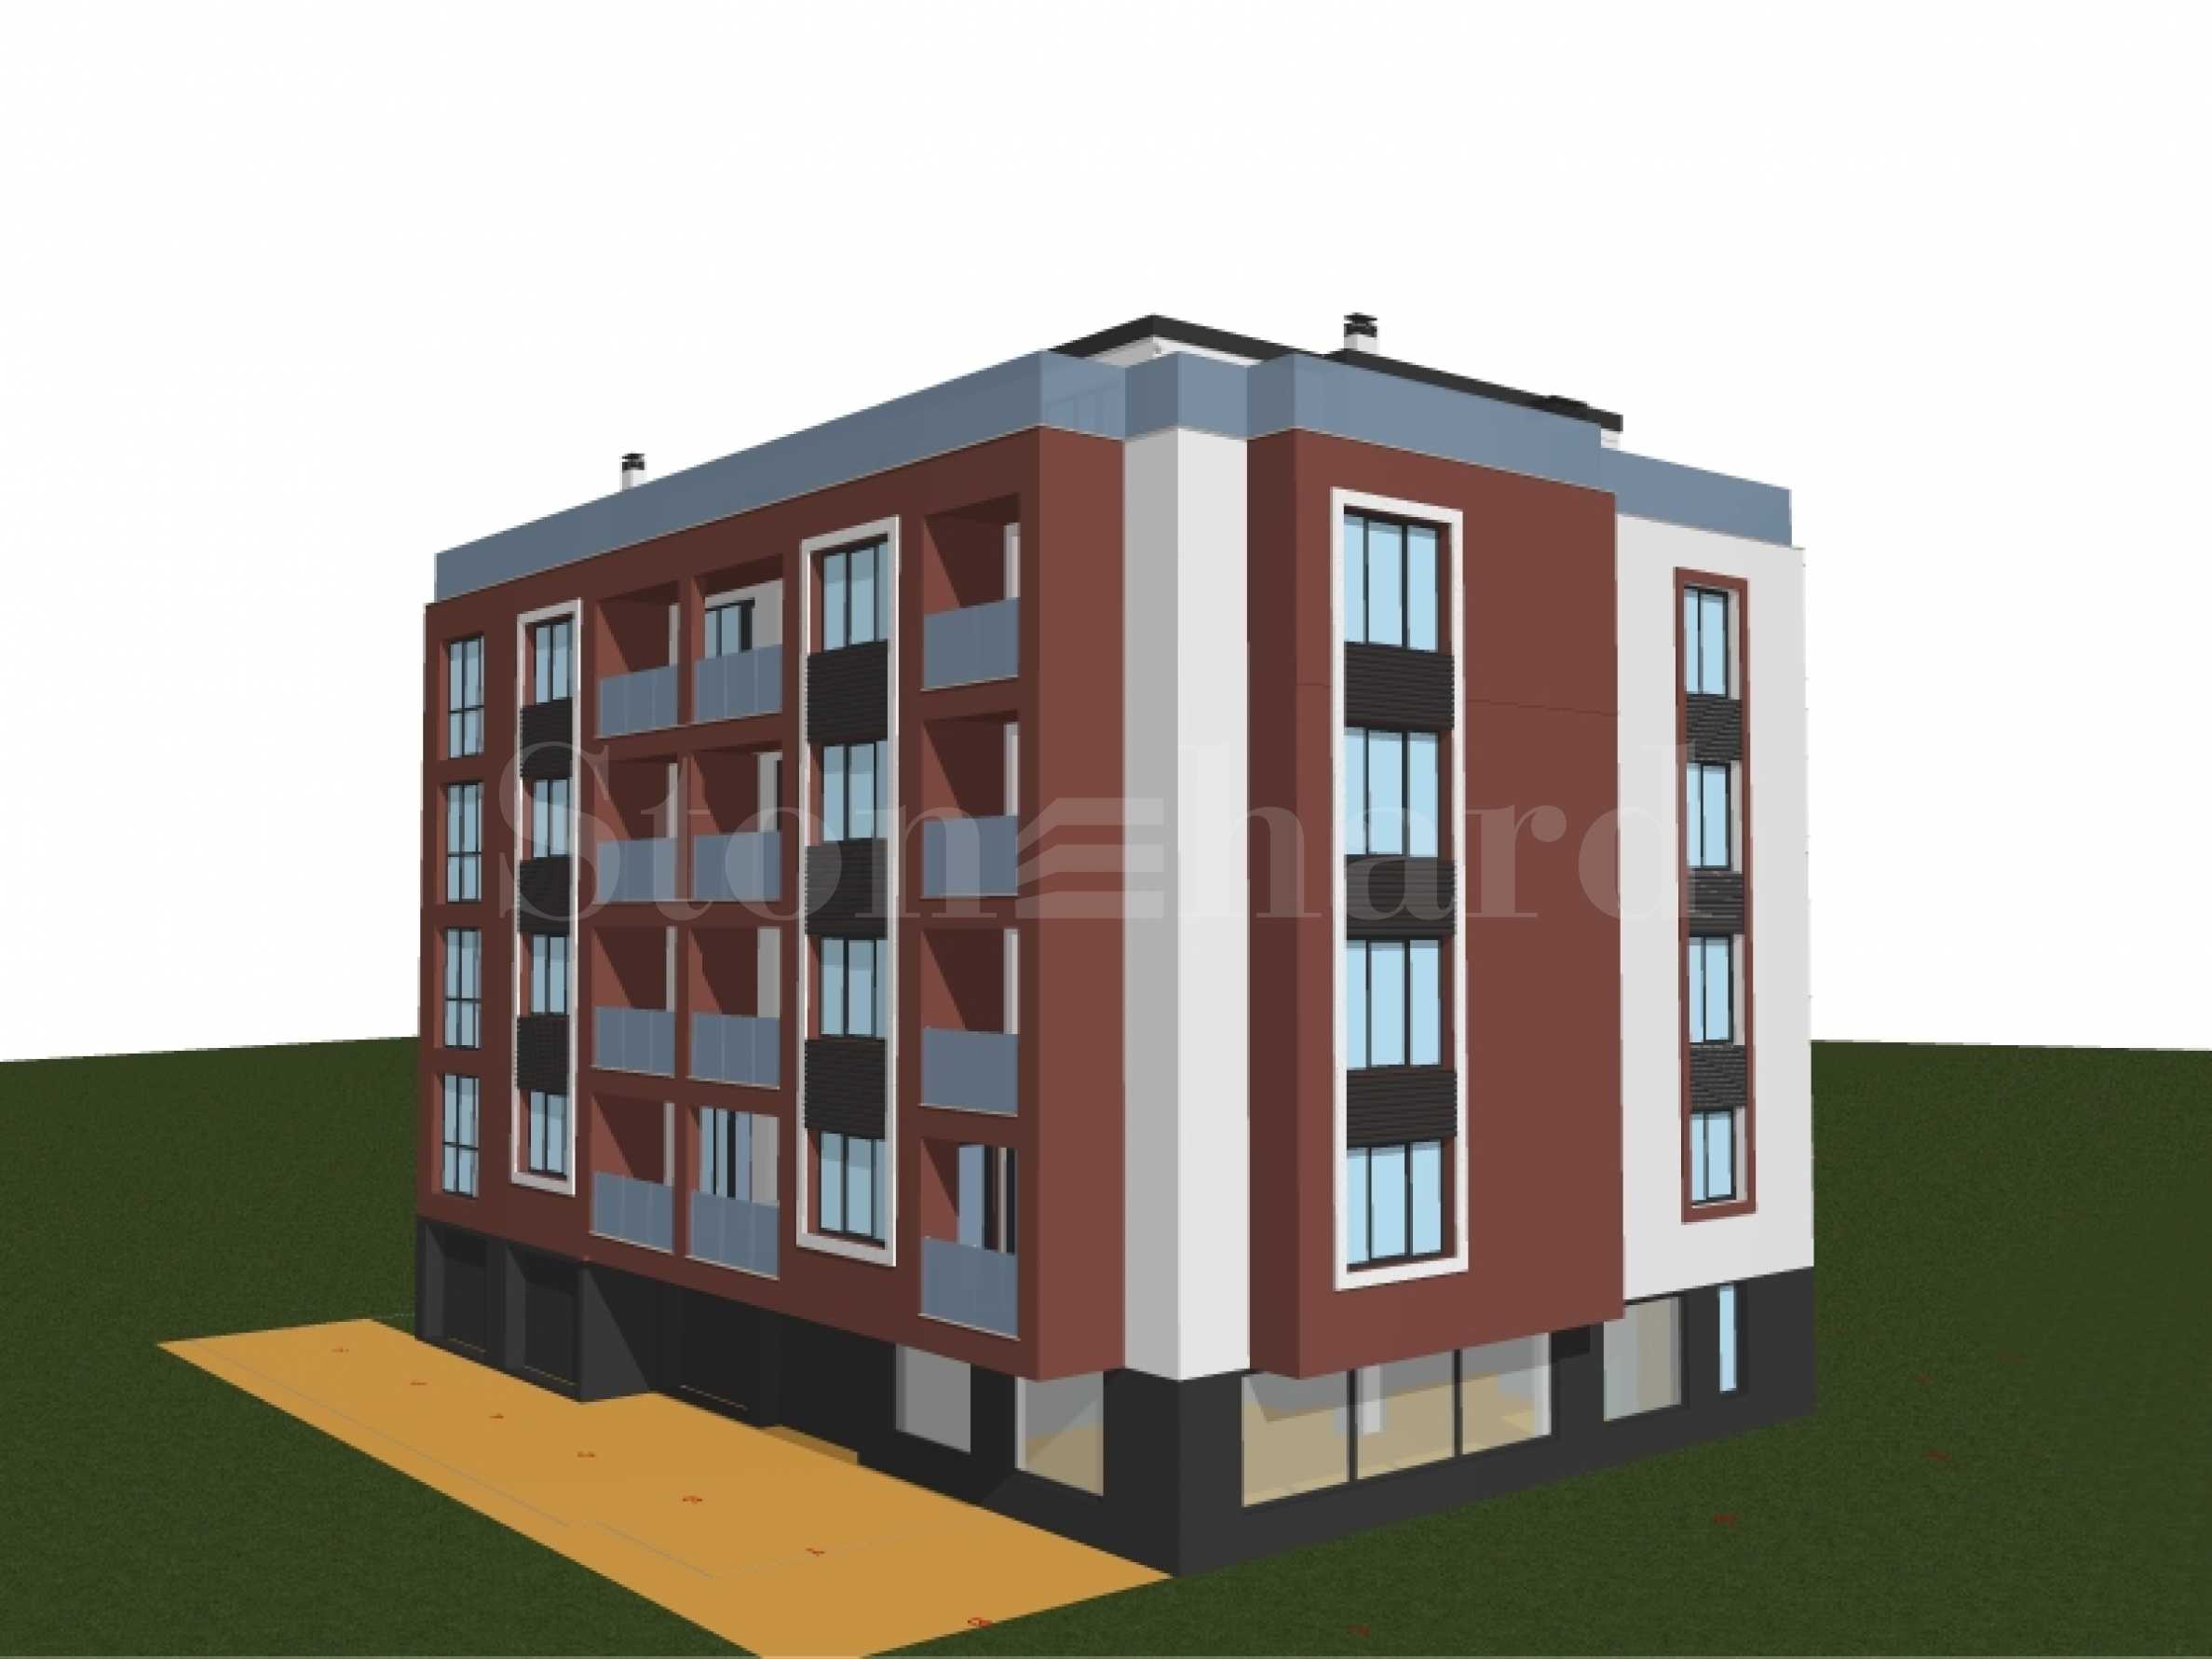 Residential building in Manastirski Livadi district with different types of apartments under construction1 - Stonehard